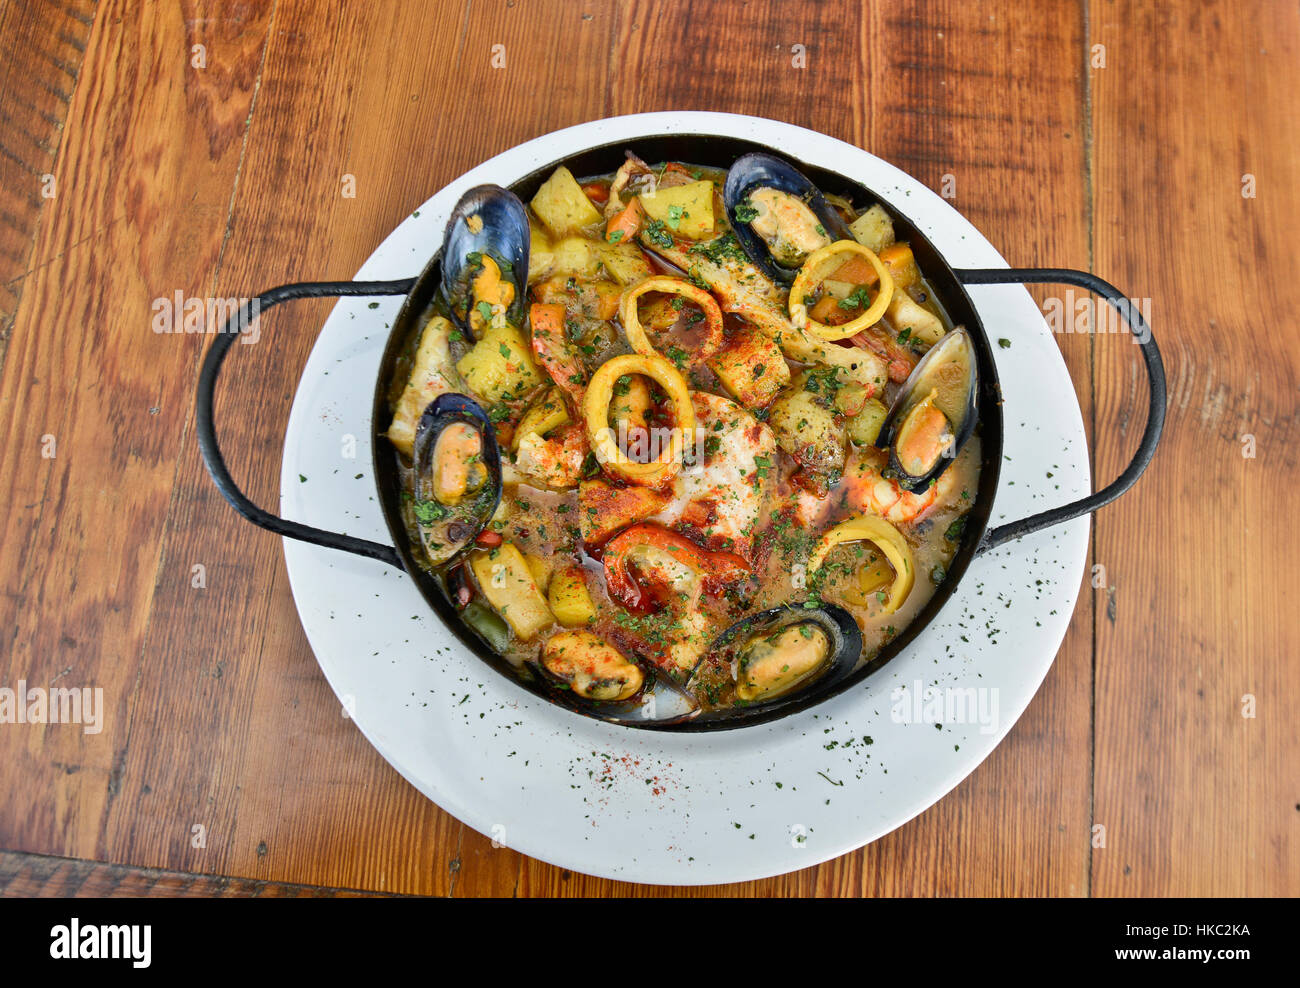 Traditional Spanish seafood stew (cazuela de mariscos) served on wooden table Stock Photo